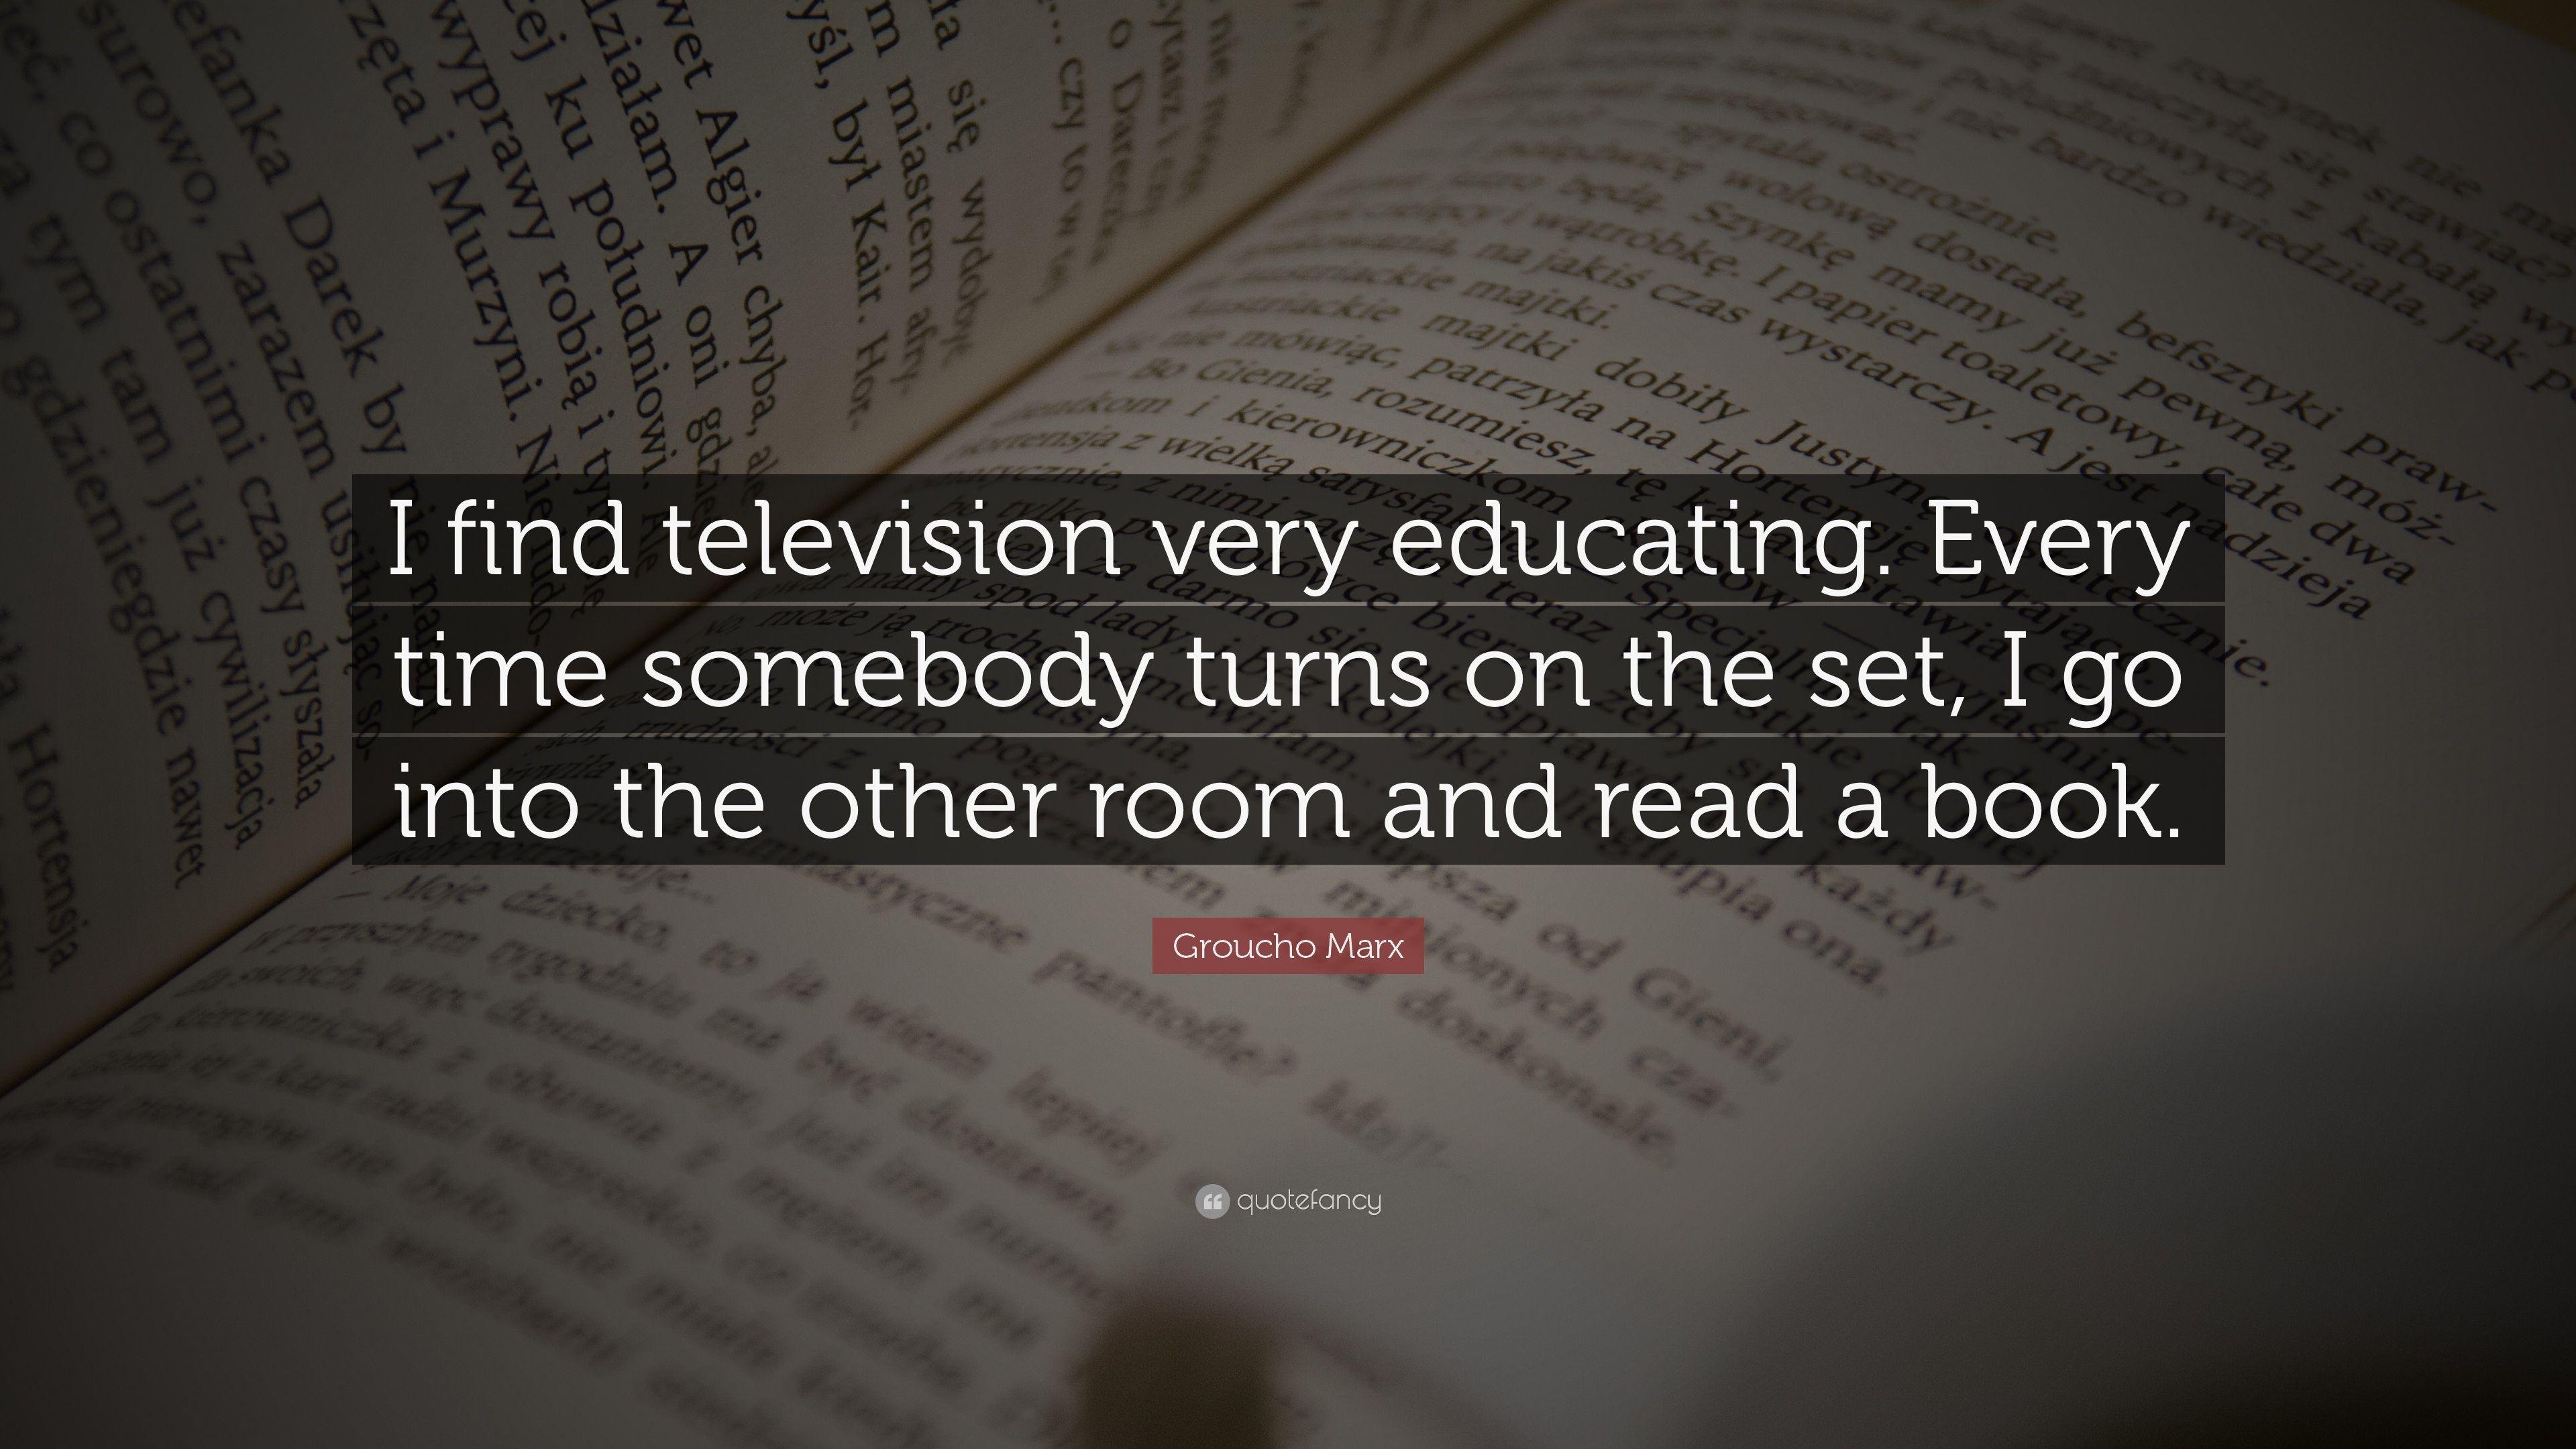 Groucho Marx Quote: “I find television very educating. Every time